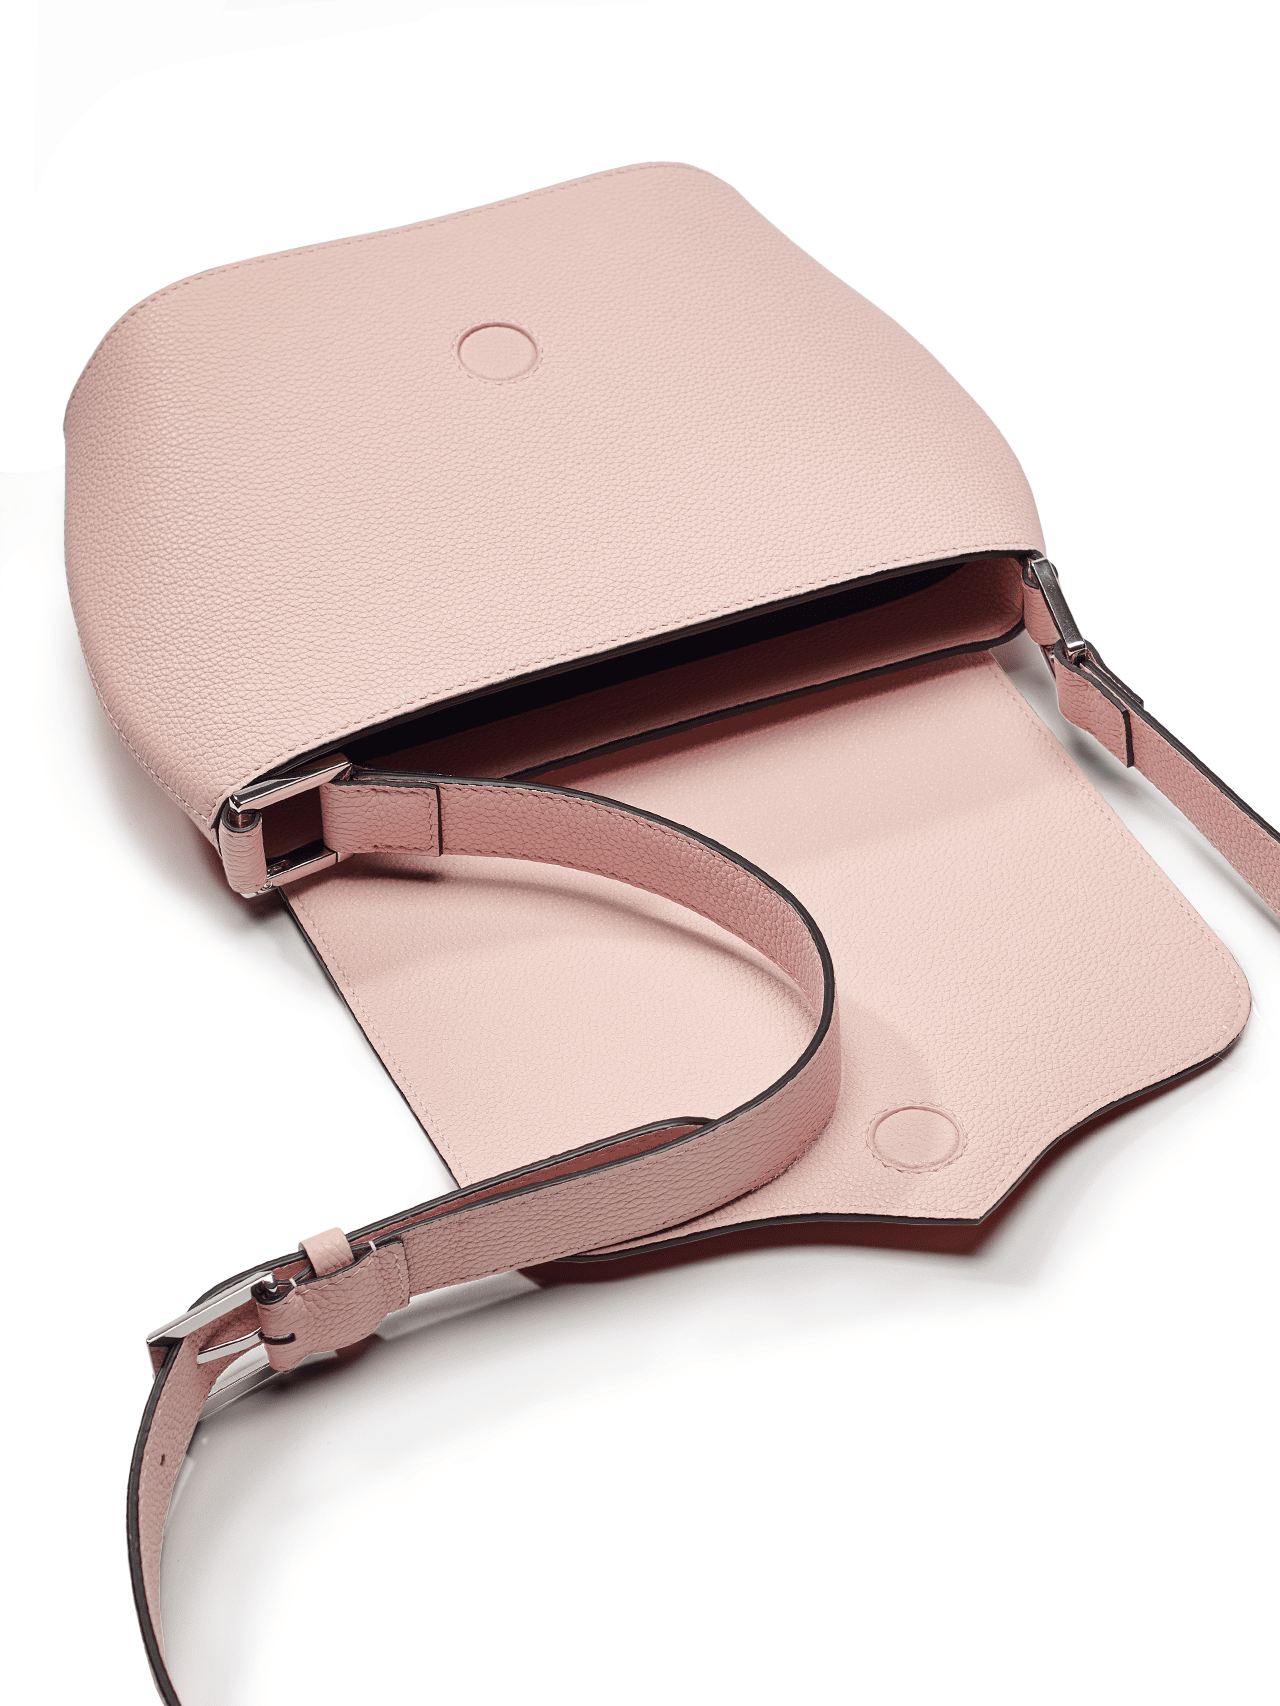 bag leather jean rousseau pink